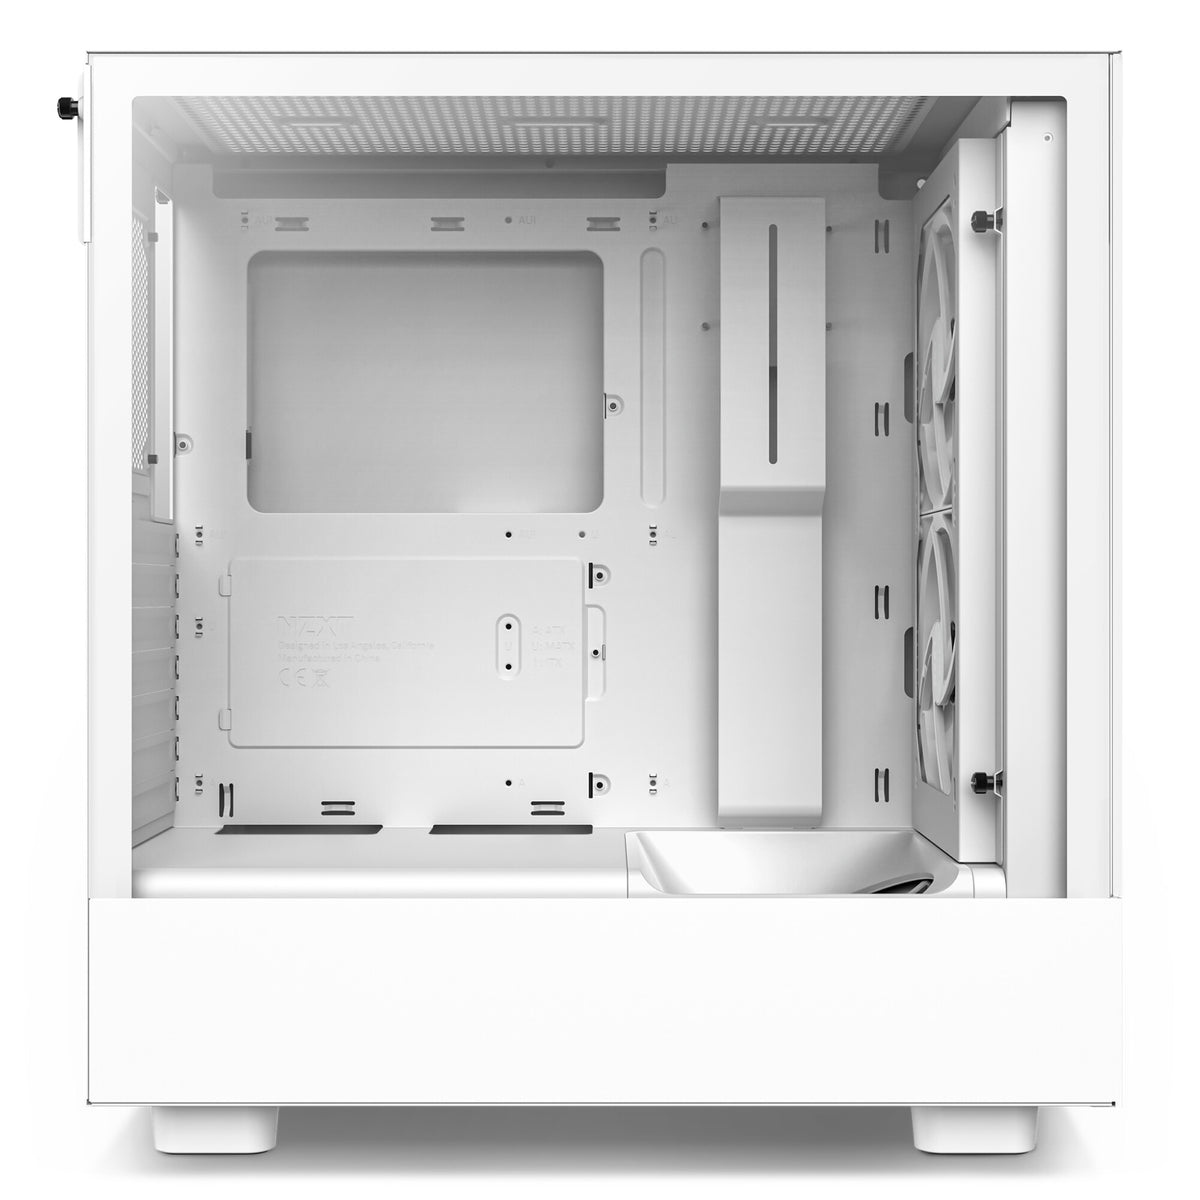 NZXT H5 Elite - ATX Mid Tower Case in White